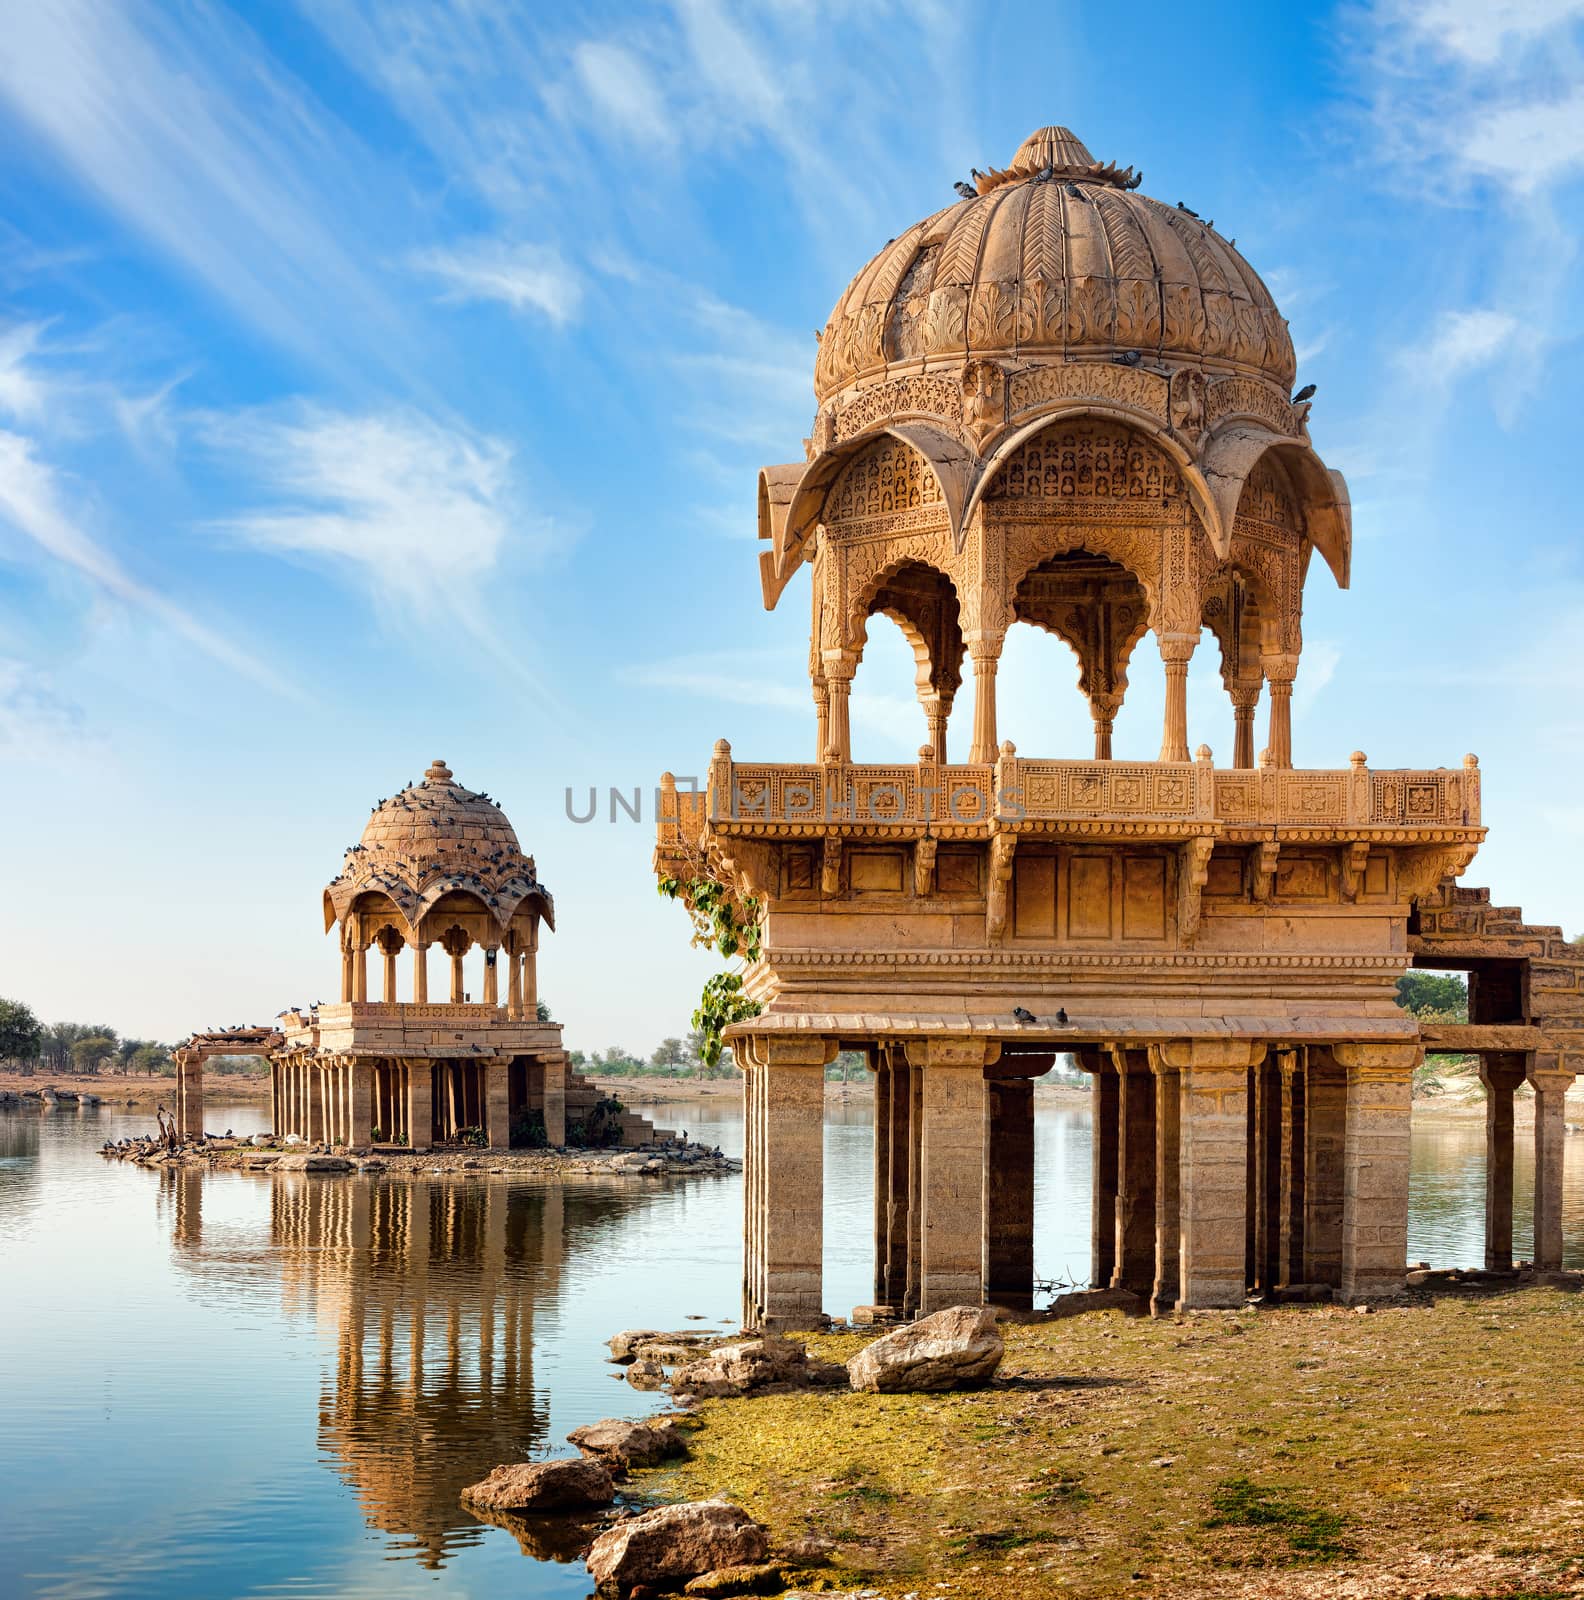 Gadi Sagar (Gadisar) Lake is one of the most important tourist attractions in Jaisalmer, Rajasthan, North India.   	
Artistically carved temples and shrines around The Lake Gadisar Jaisalmer.